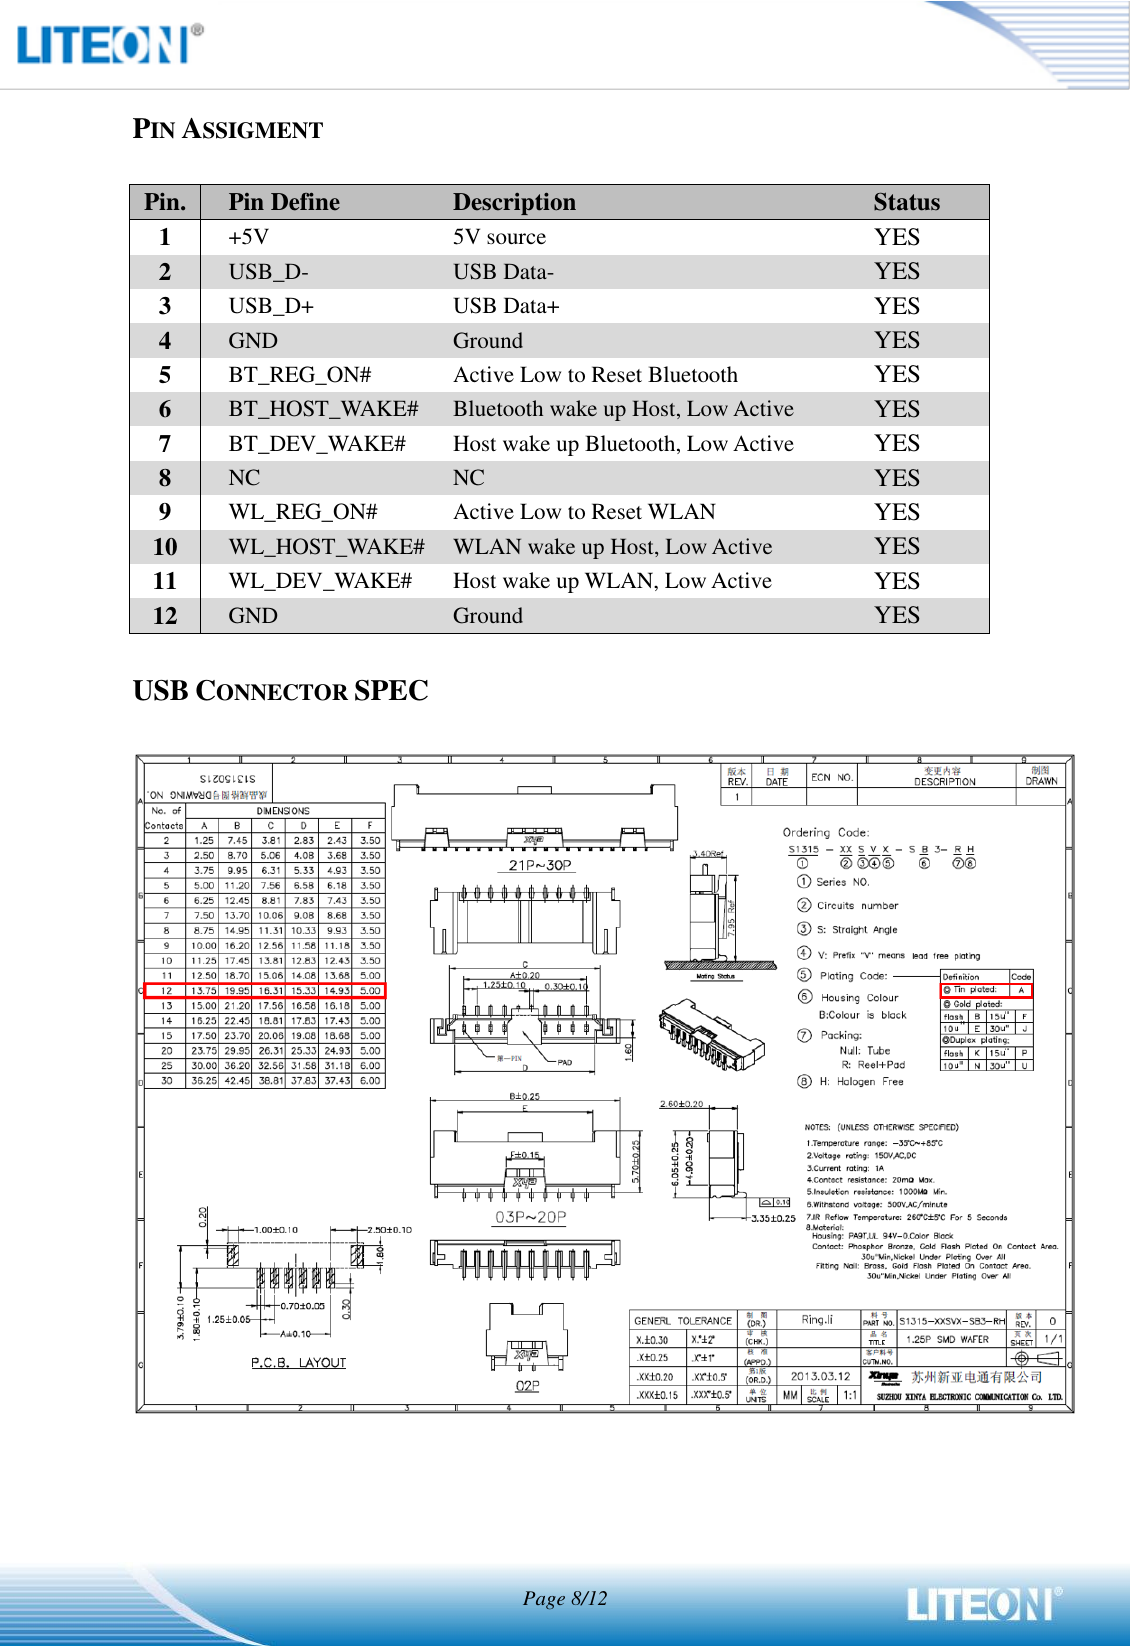  Page 8/12   PIN ASSIGMENT  Pin. Pin Define Description Status 1 +5V 5V source YES 2 USB_D- USB Data- YES 3 USB_D+ USB Data+ YES 4 GND Ground YES 5 BT_REG_ON# Active Low to Reset Bluetooth YES 6 BT_HOST_WAKE# Bluetooth wake up Host, Low Active YES 7 BT_DEV_WAKE# Host wake up Bluetooth, Low Active YES 8 NC NC YES 9 WL_REG_ON# Active Low to Reset WLAN YES 10 WL_HOST_WAKE# WLAN wake up Host, Low Active YES 11 WL_DEV_WAKE# Host wake up WLAN, Low Active YES 12 GND Ground YES    USB CONNECTOR SPEC       